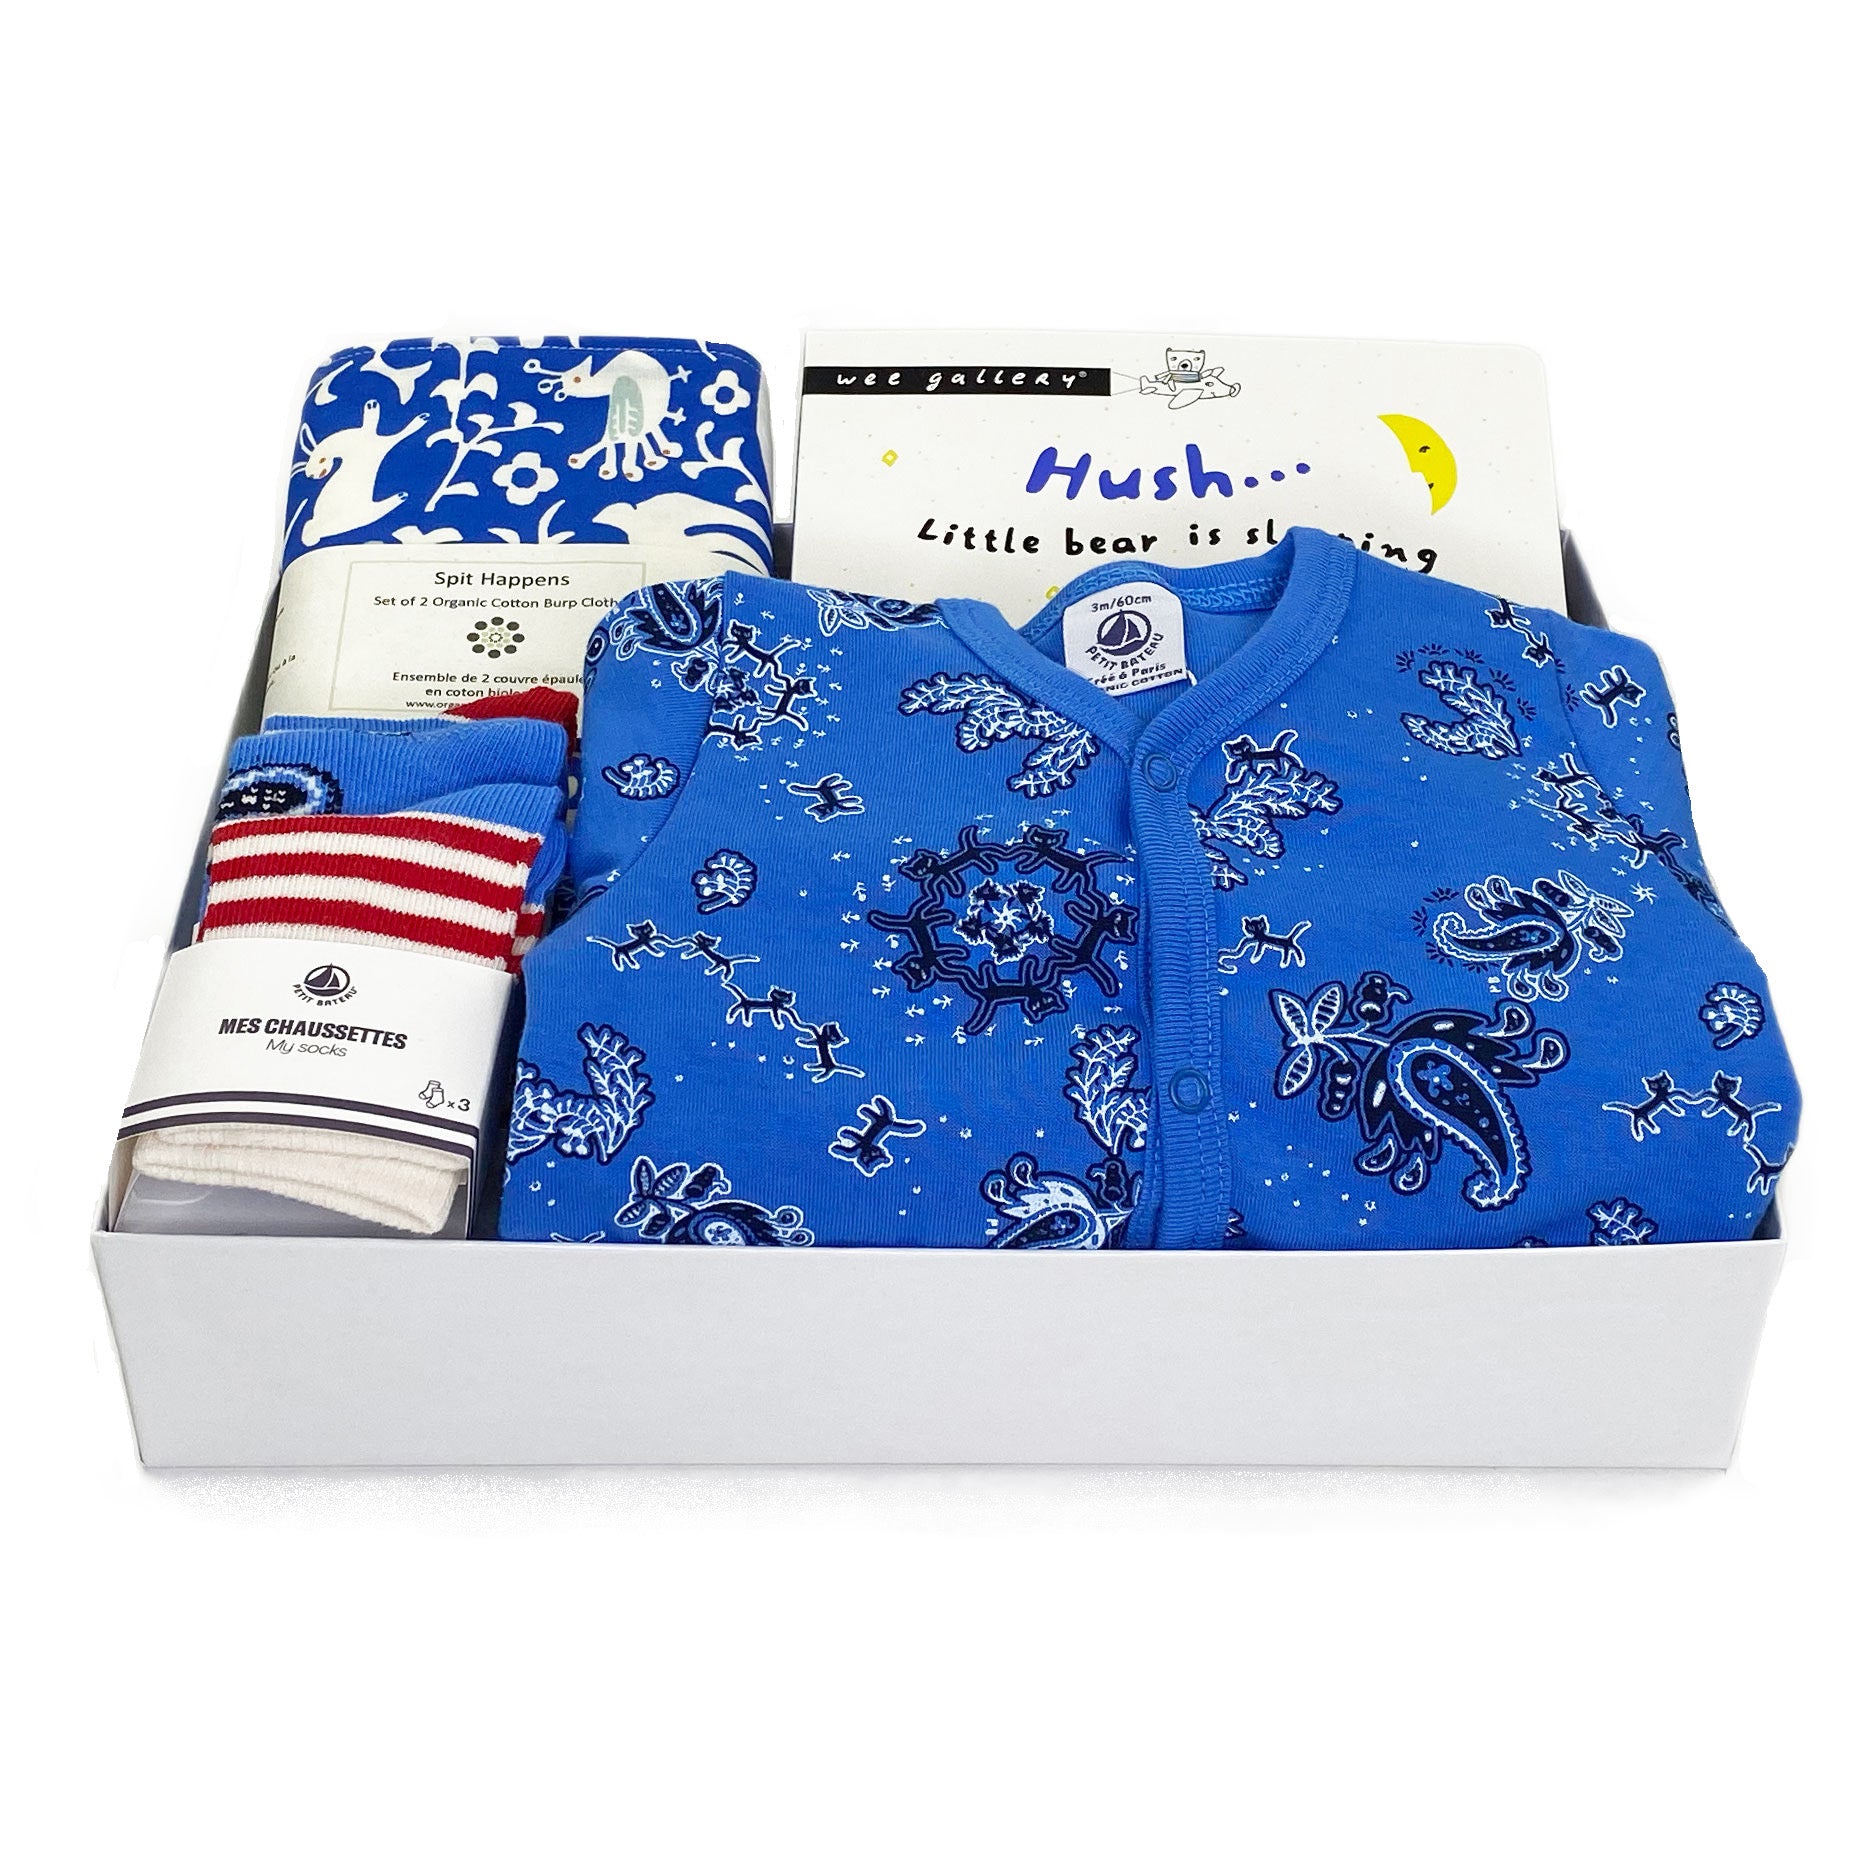 Petit Bateau Luxury Baby Gift Box with a sleeper, socks, burp cloths and book at Bonjour Baby Baskets